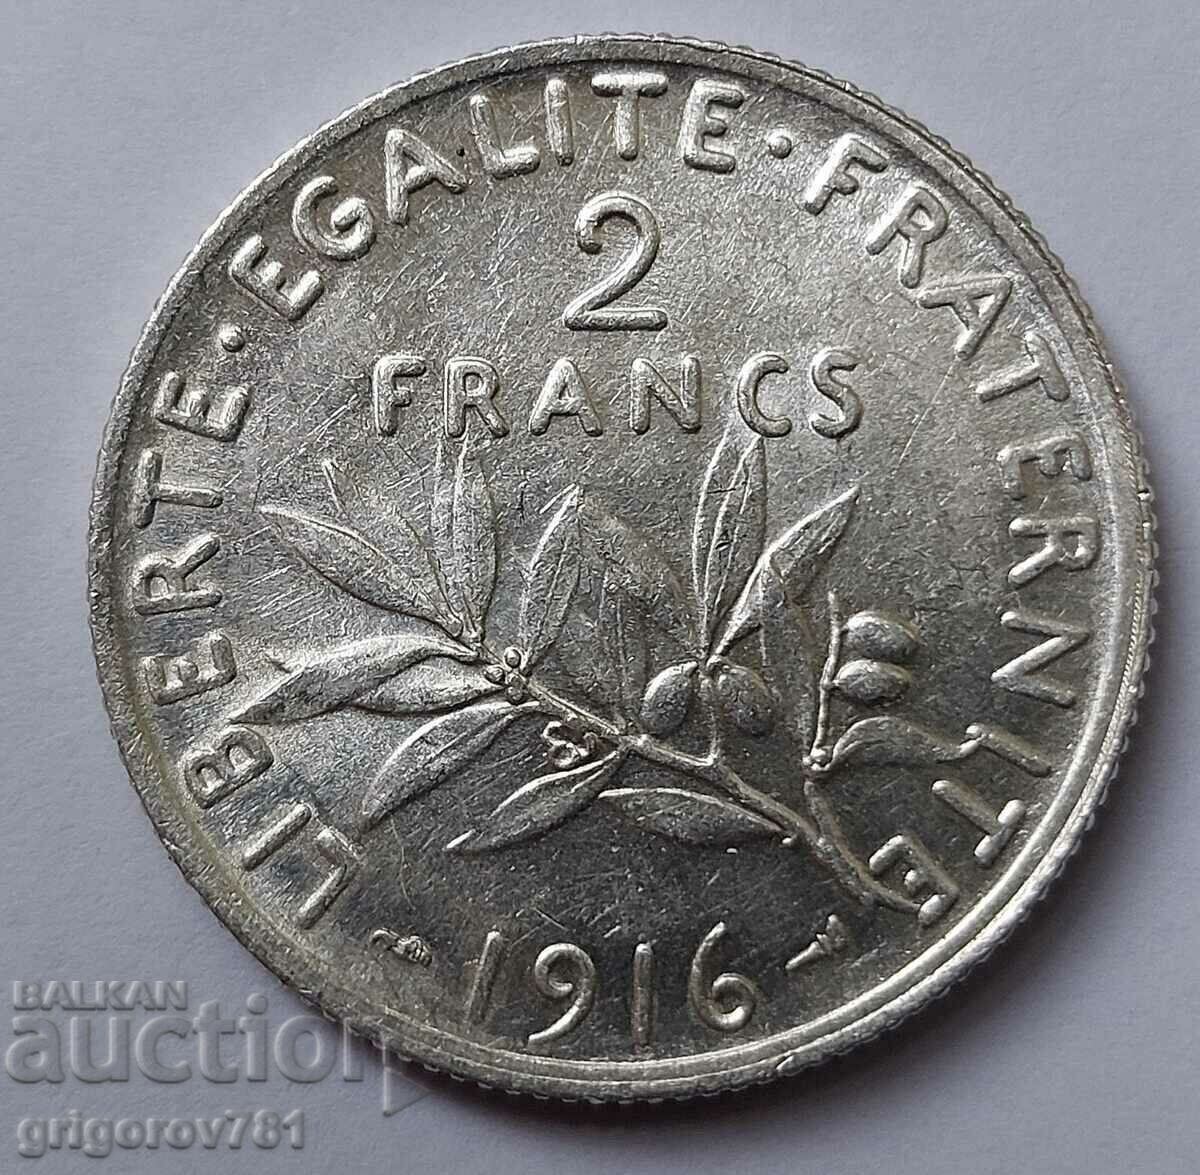 2 Francs Silver France 1916 - Silver Coin #11